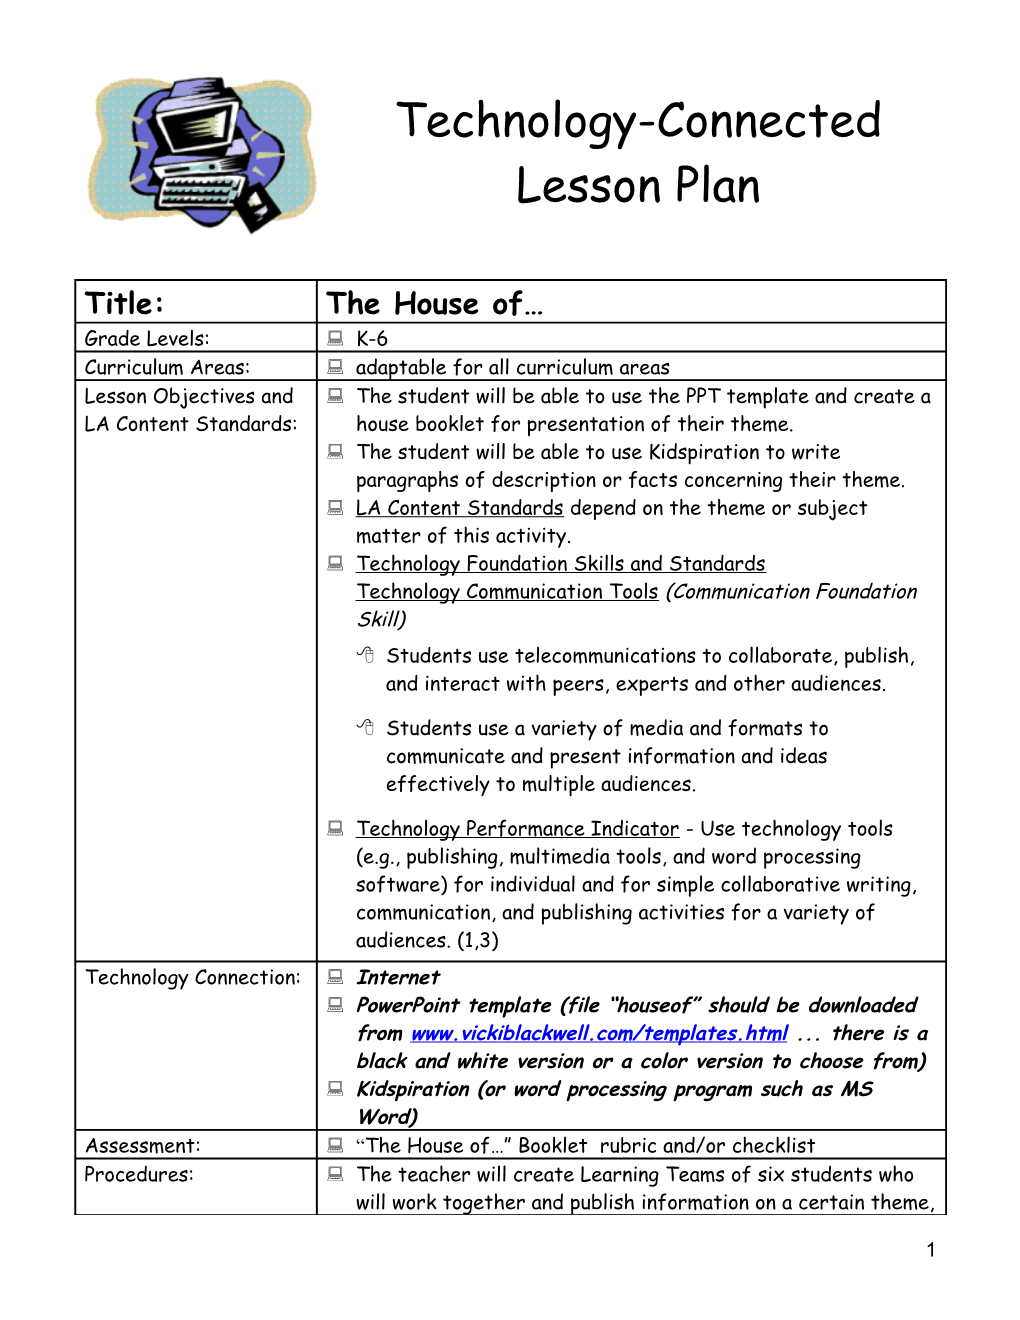 Technology-Connected Lesson Plan s1